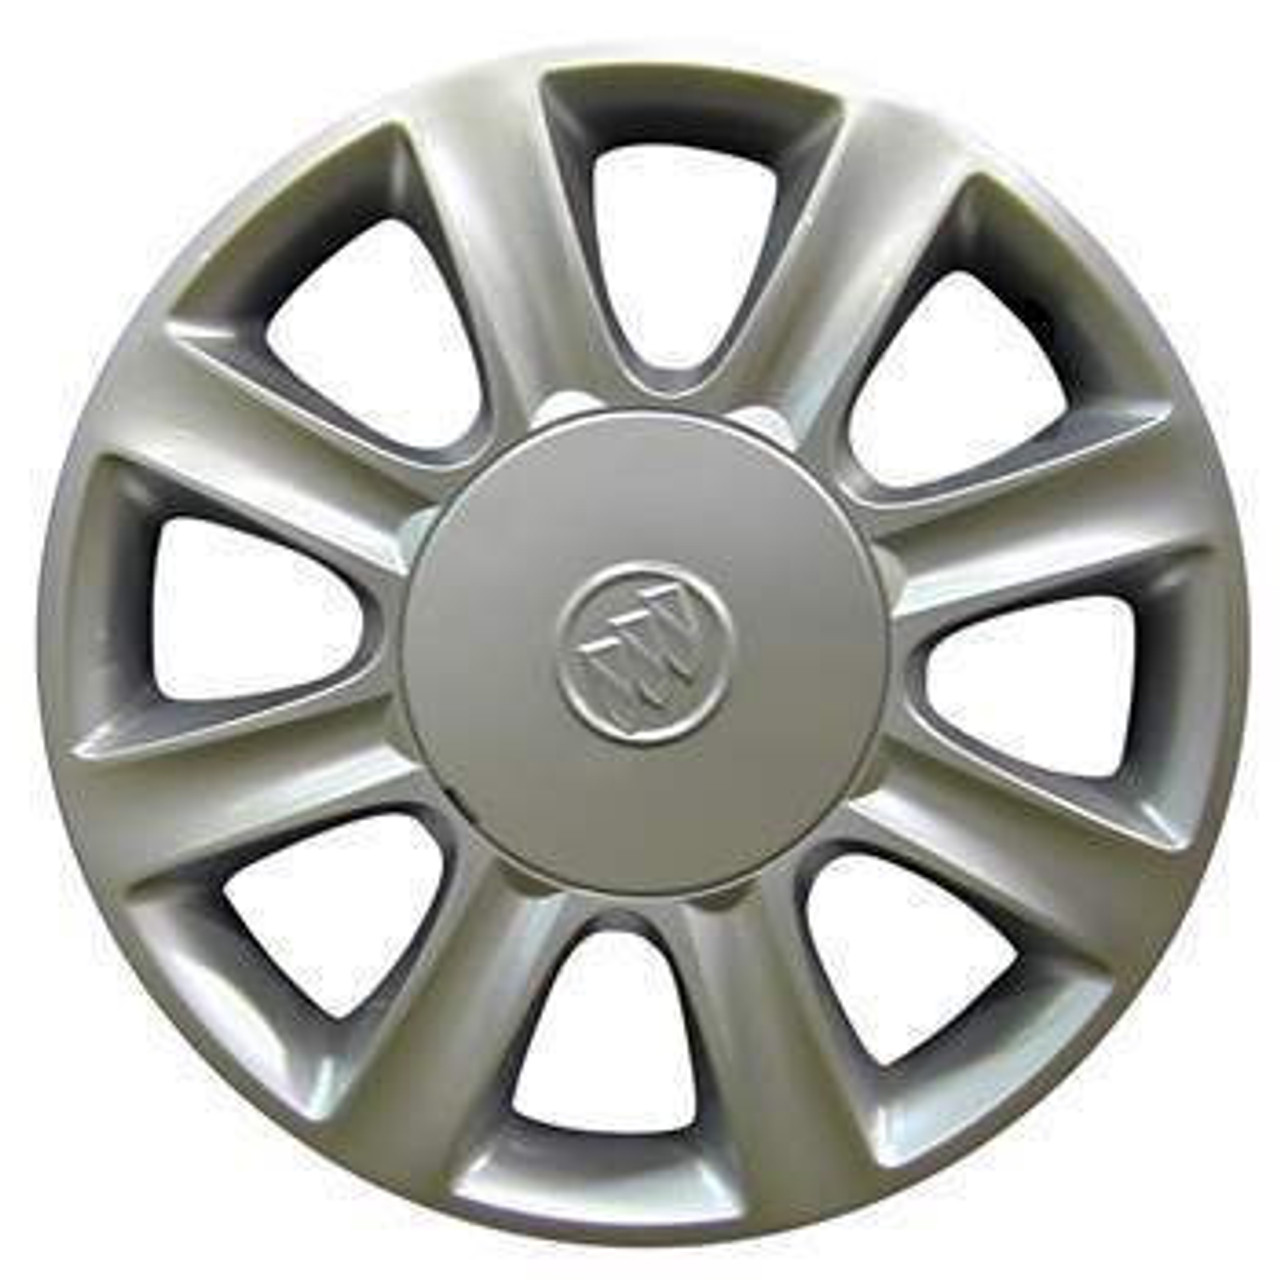 Buick Hubcaps / Wheel Covers